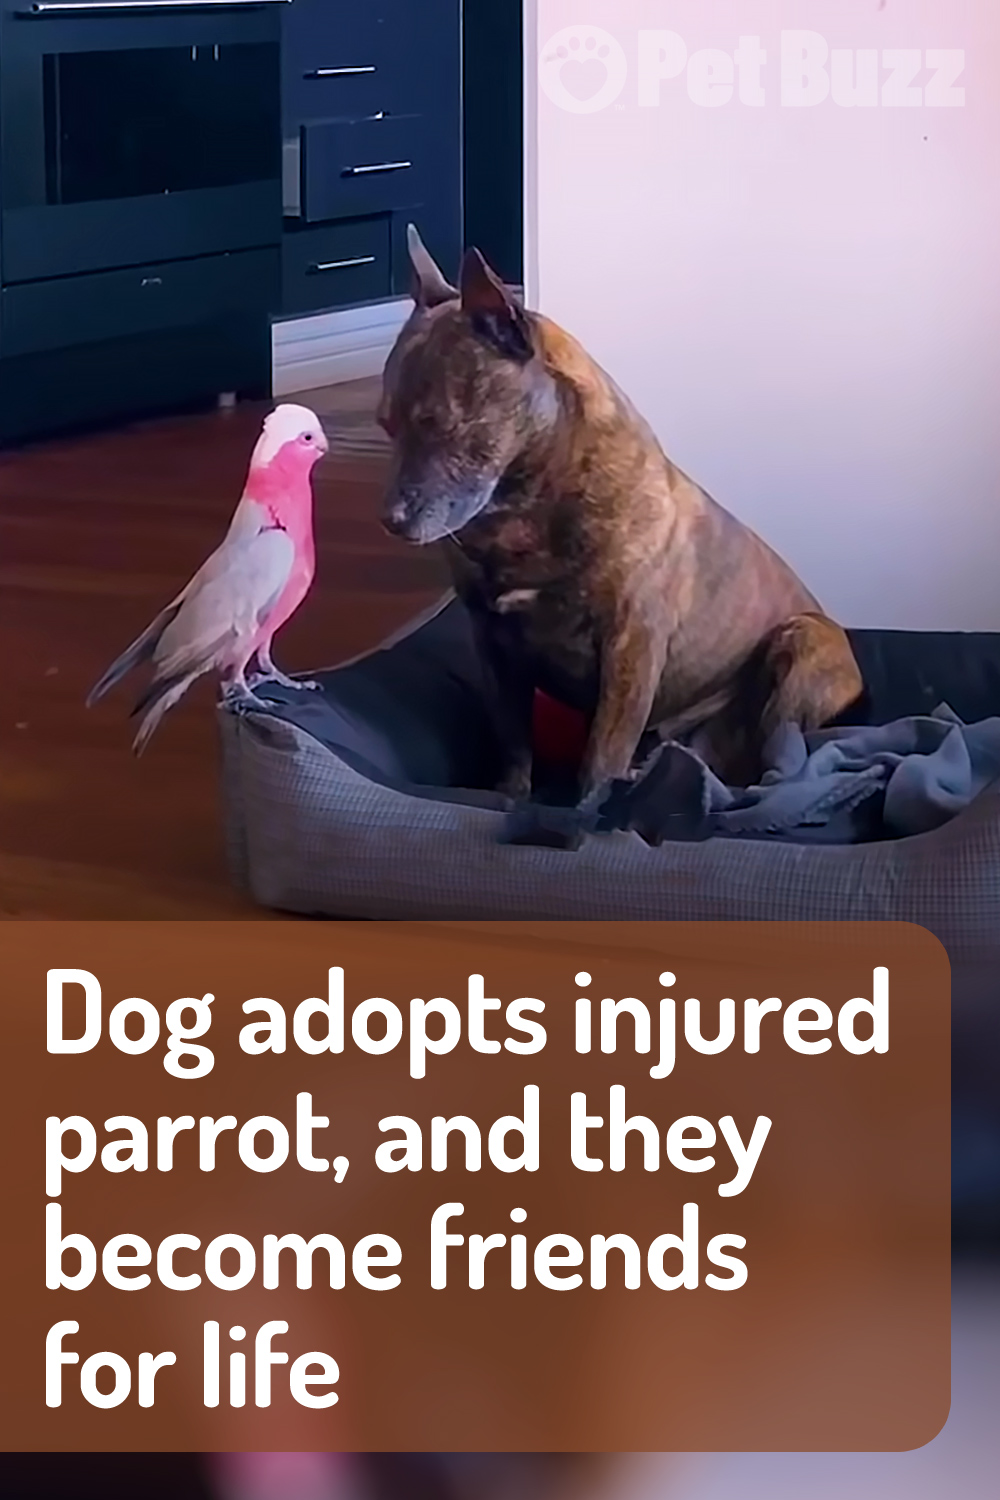 Dog adopts injured parrot, and they become friends for life